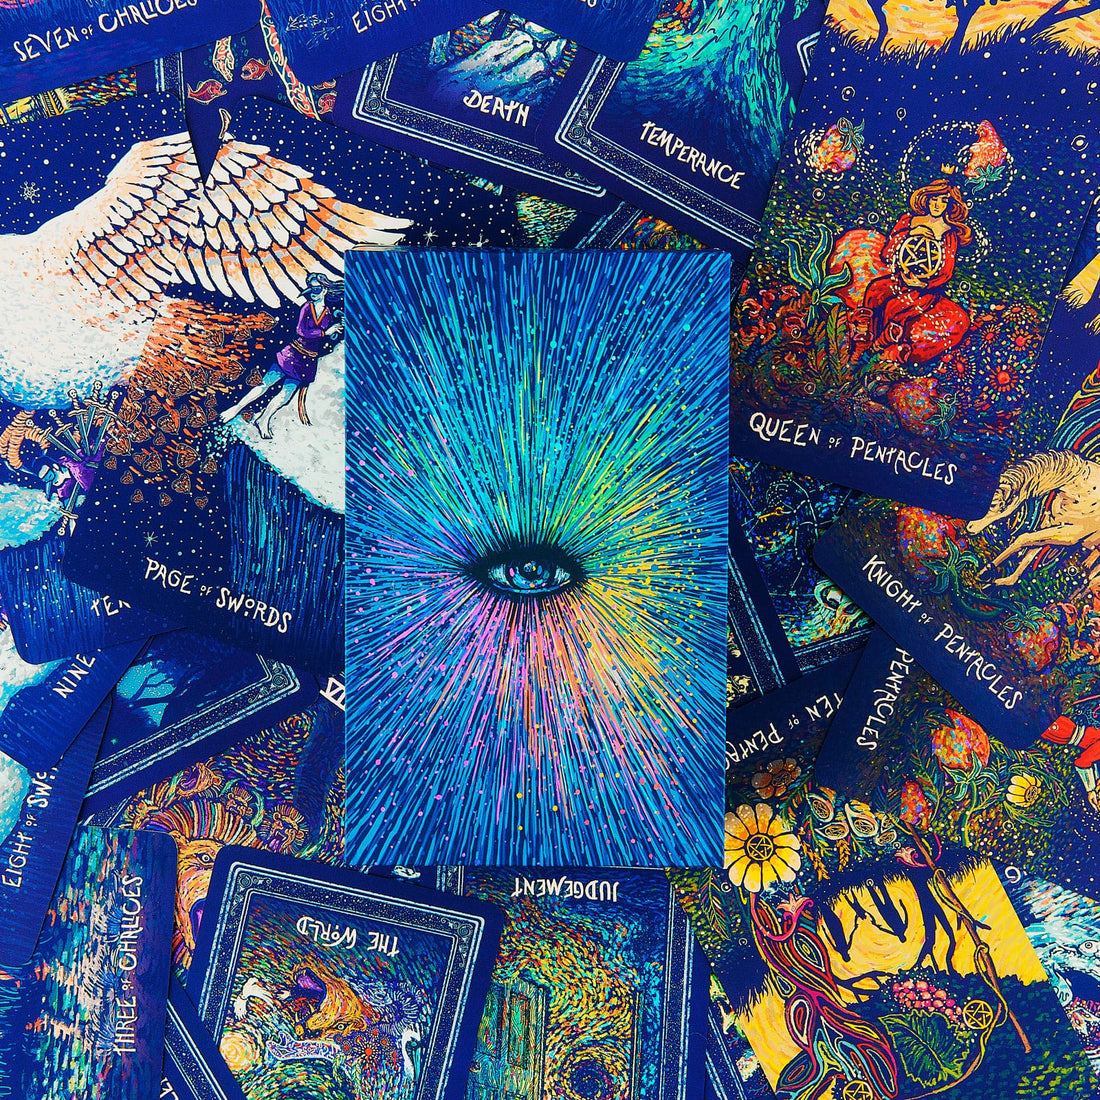 prisma visions tarot deck by james r eads